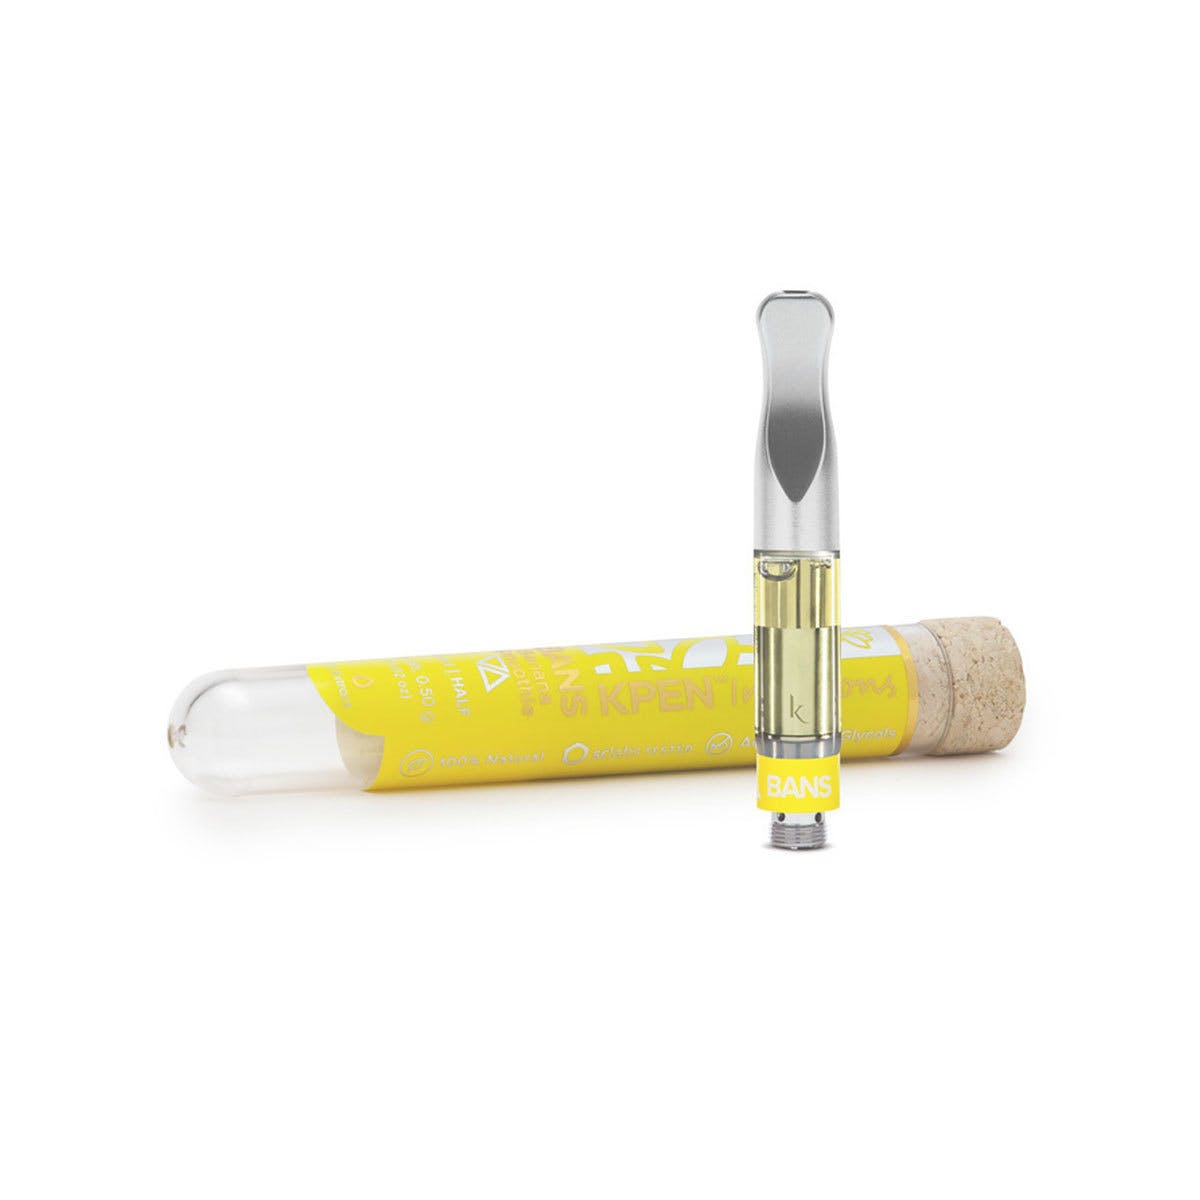 KPEN v2 Infusions - Banana Smoothie